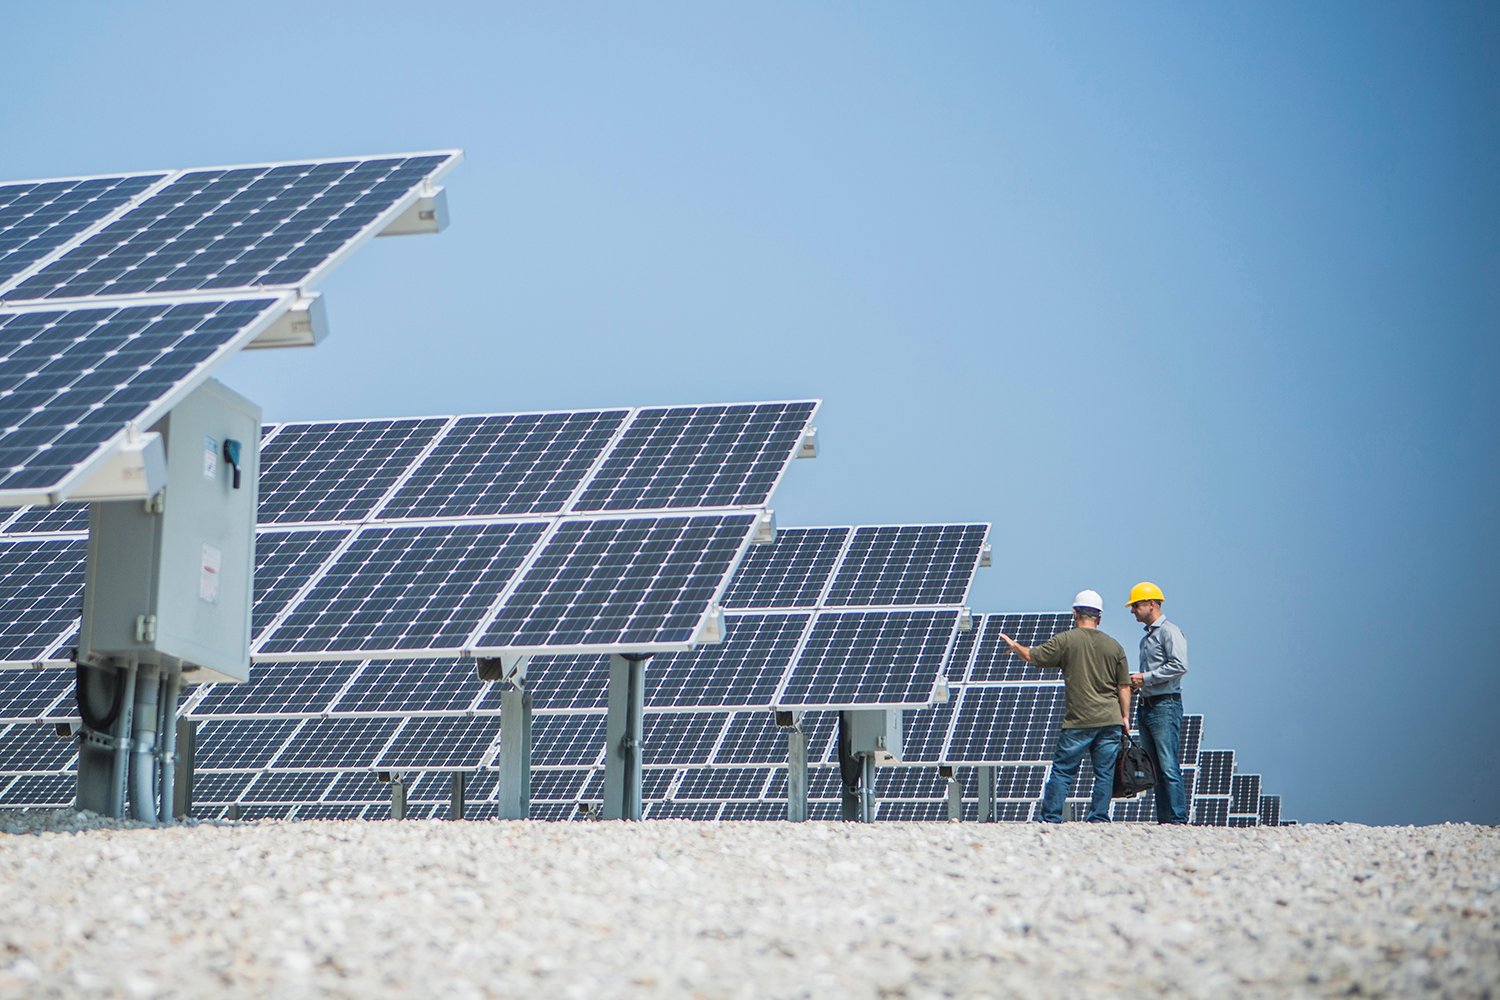 Workers and industrial solar panels